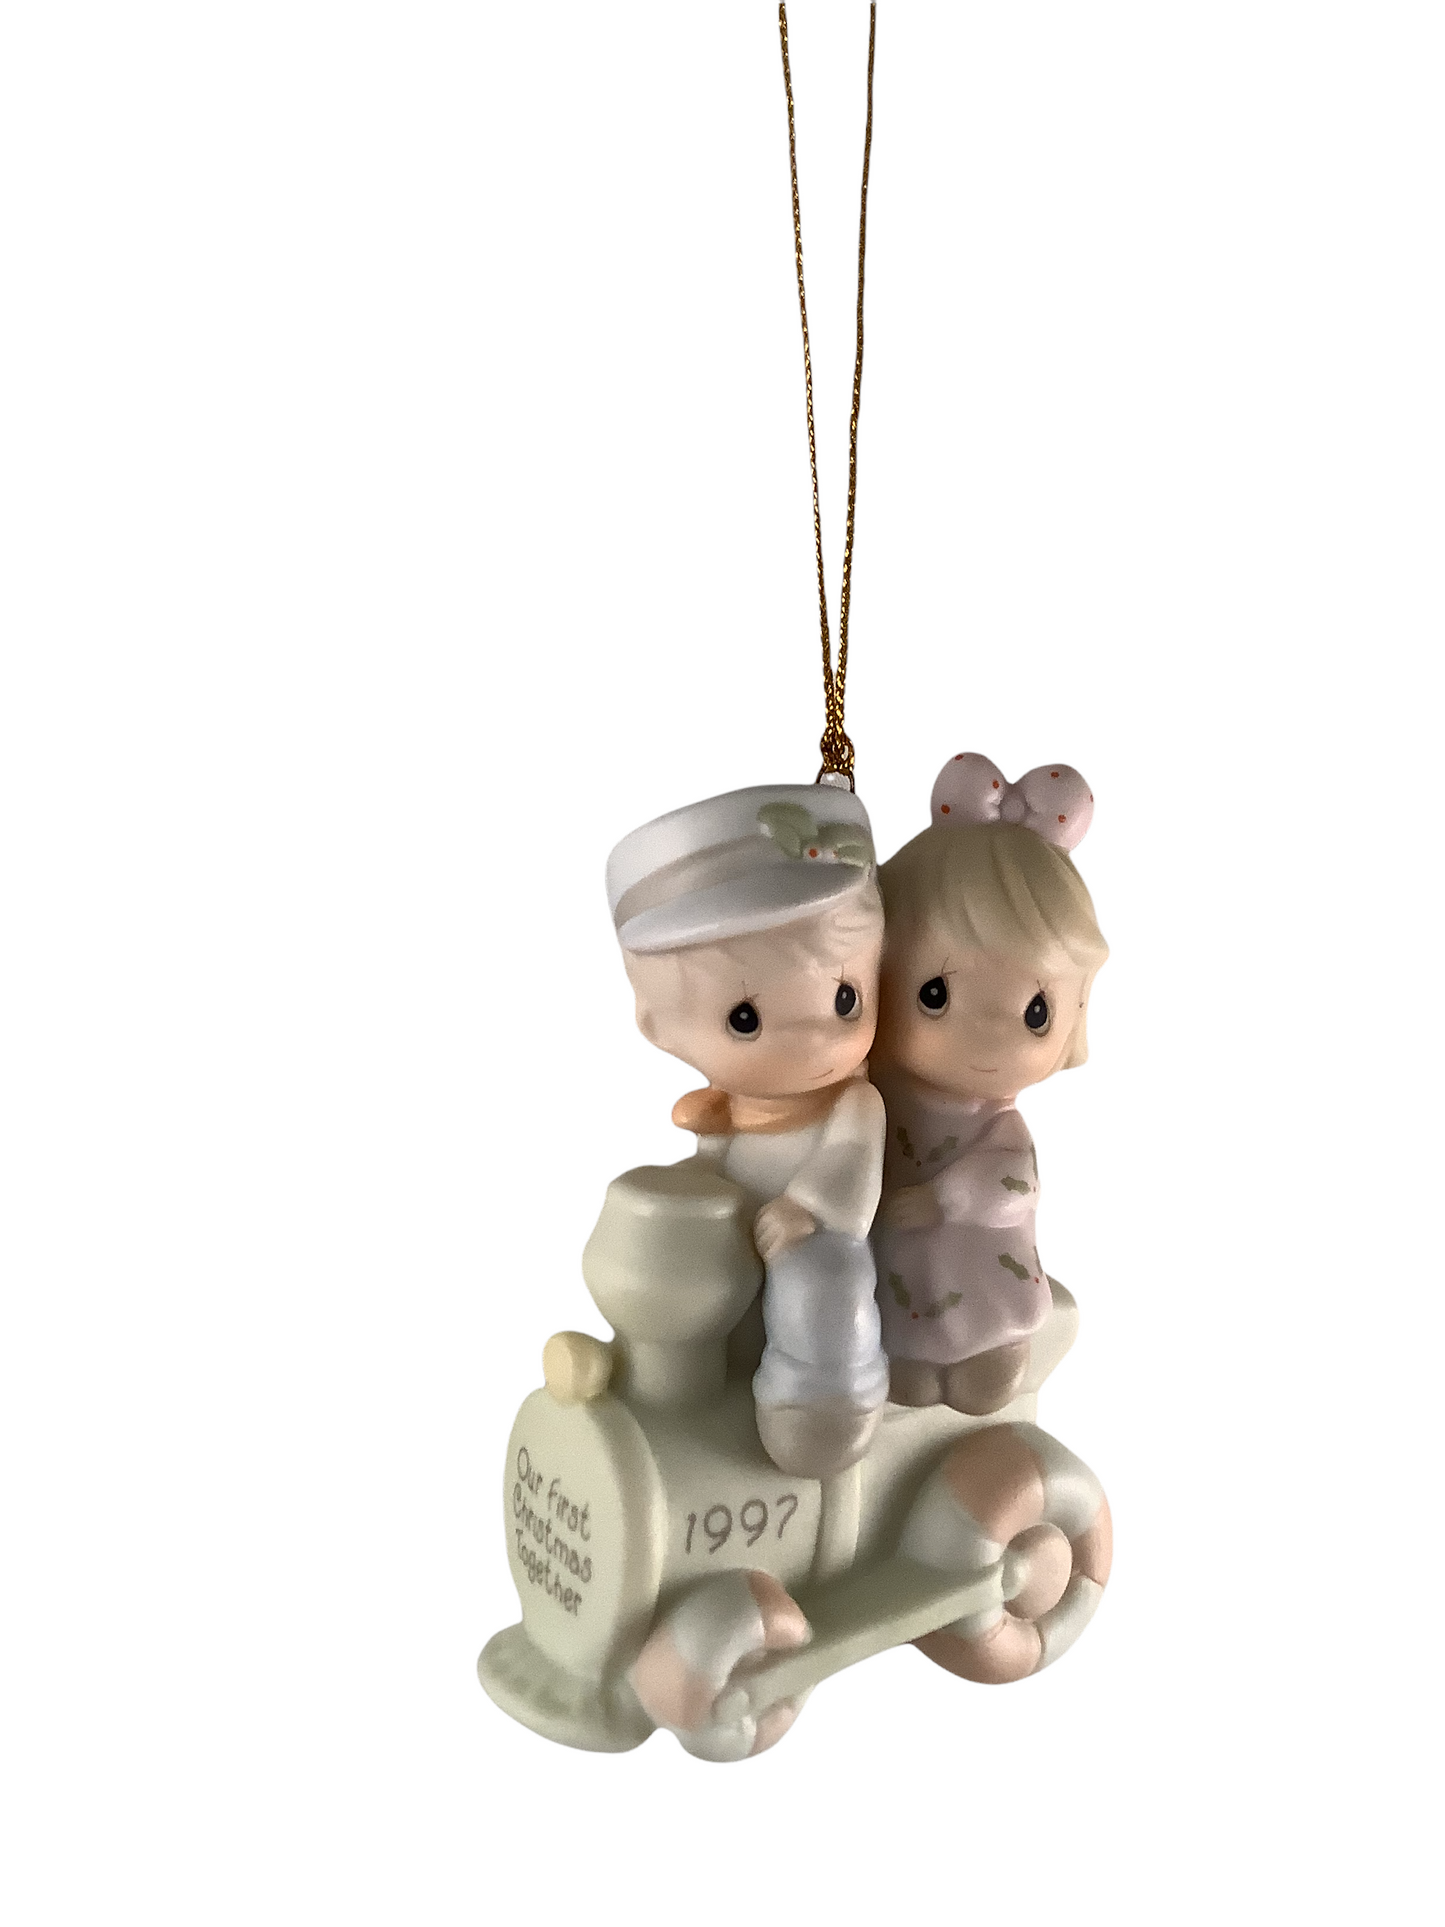 Our First Christmas Together 1997 - Precious Moment Ornament